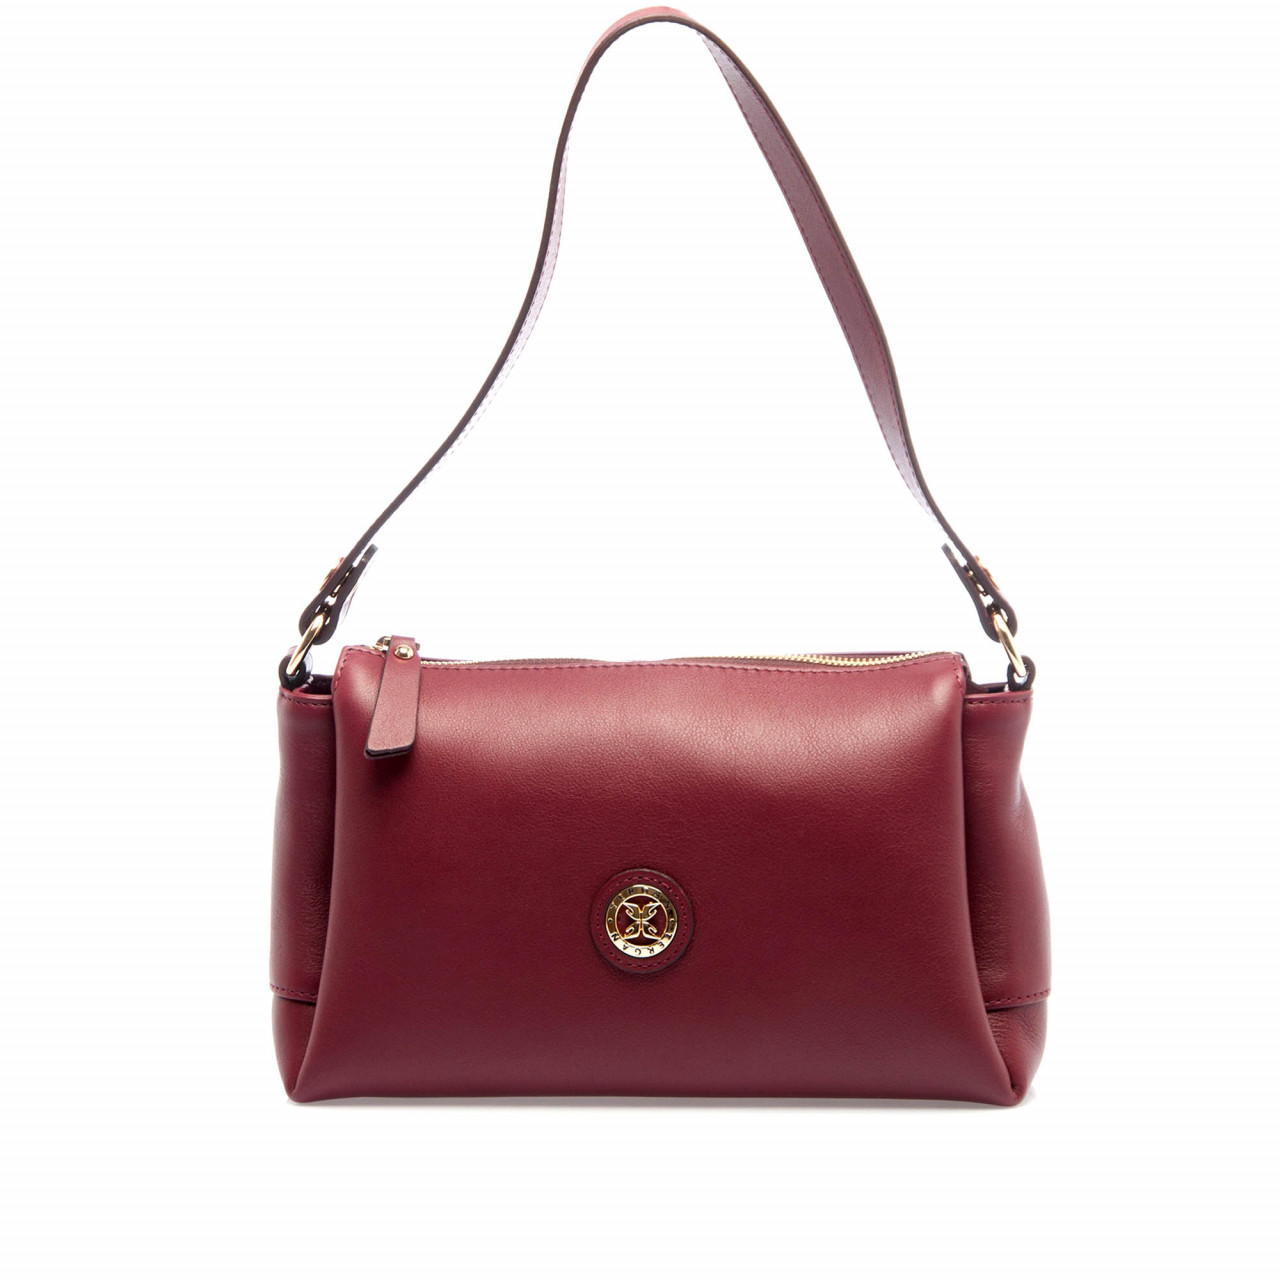 Small women's bag made of genuine leather